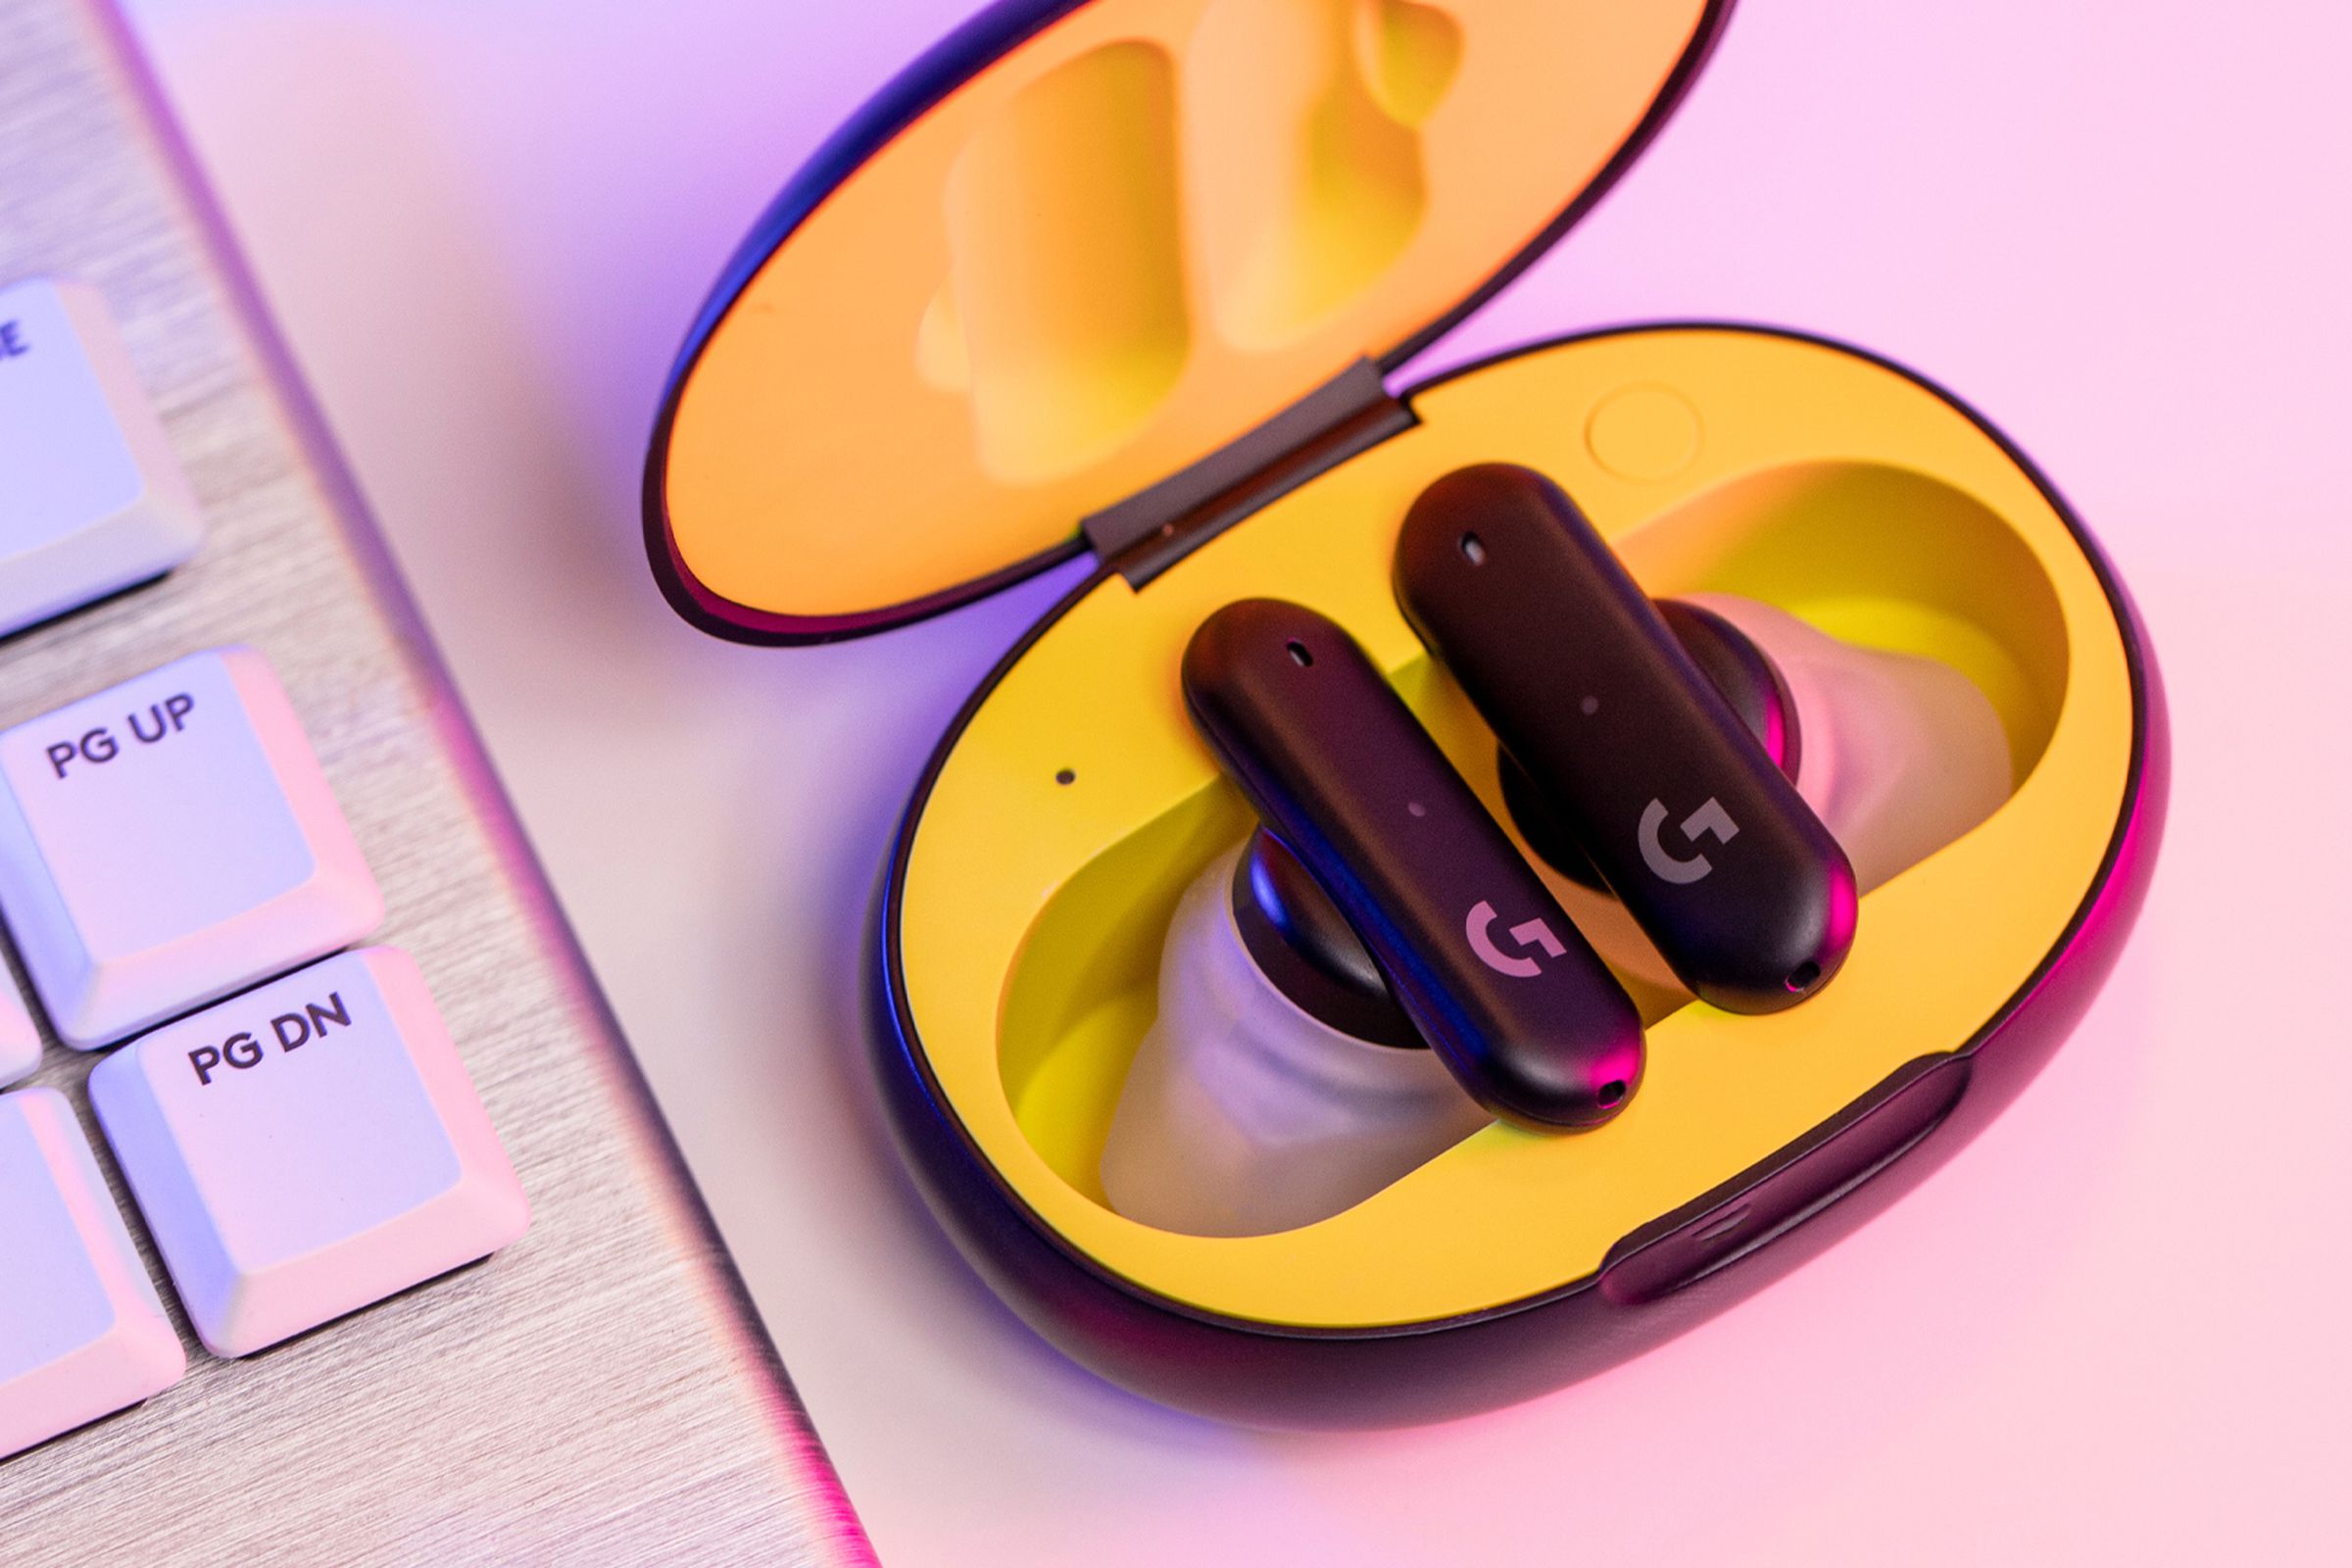 The Logitech G Fits wireless earbuds sitting in an opened yellow case.